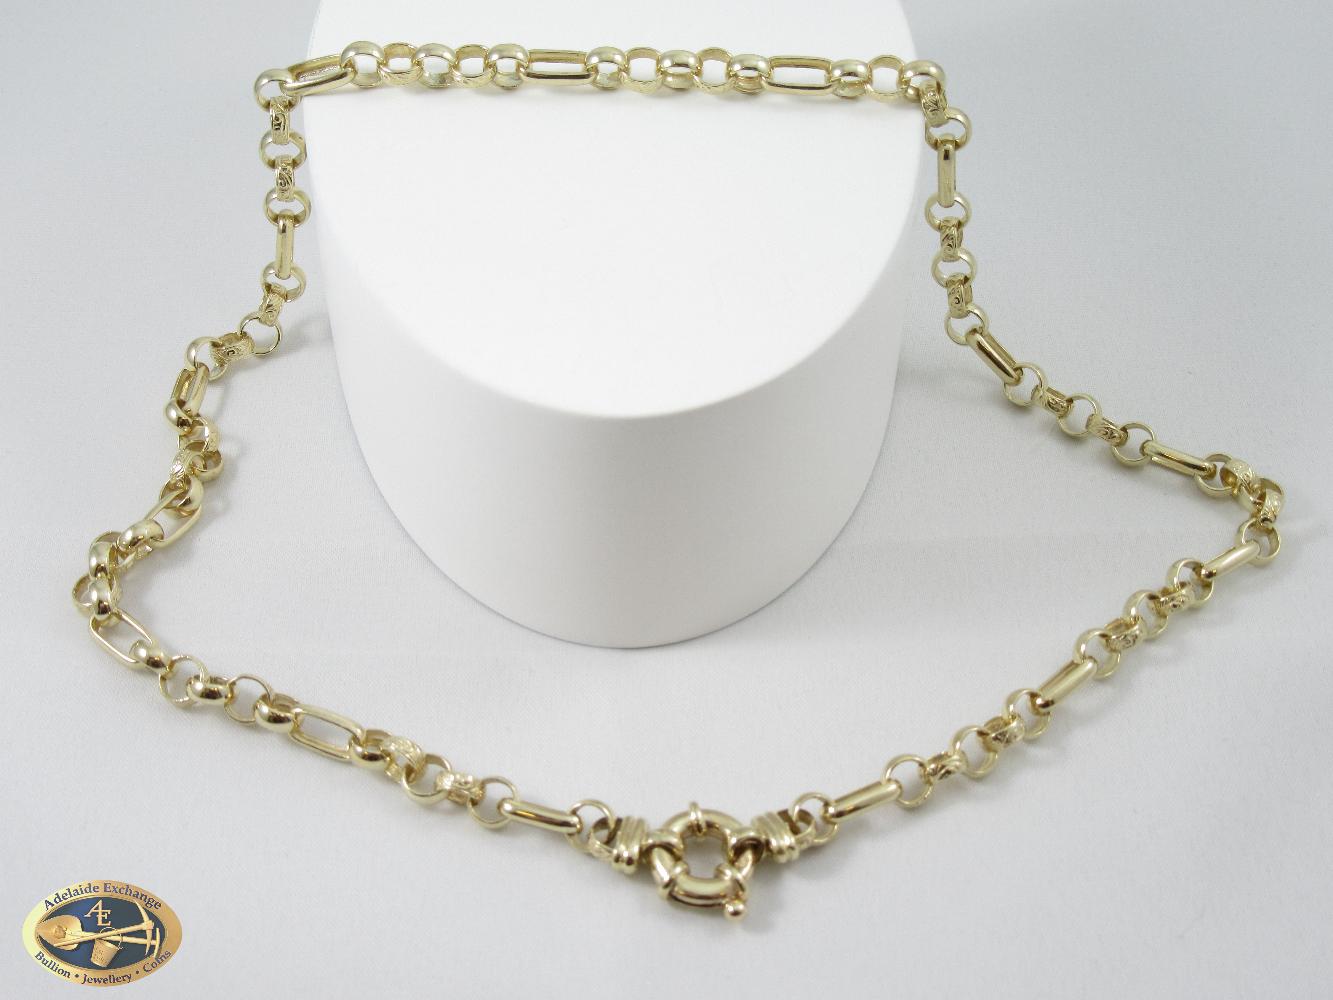 9ct Fancy Link Chain - Adelaide Exchange